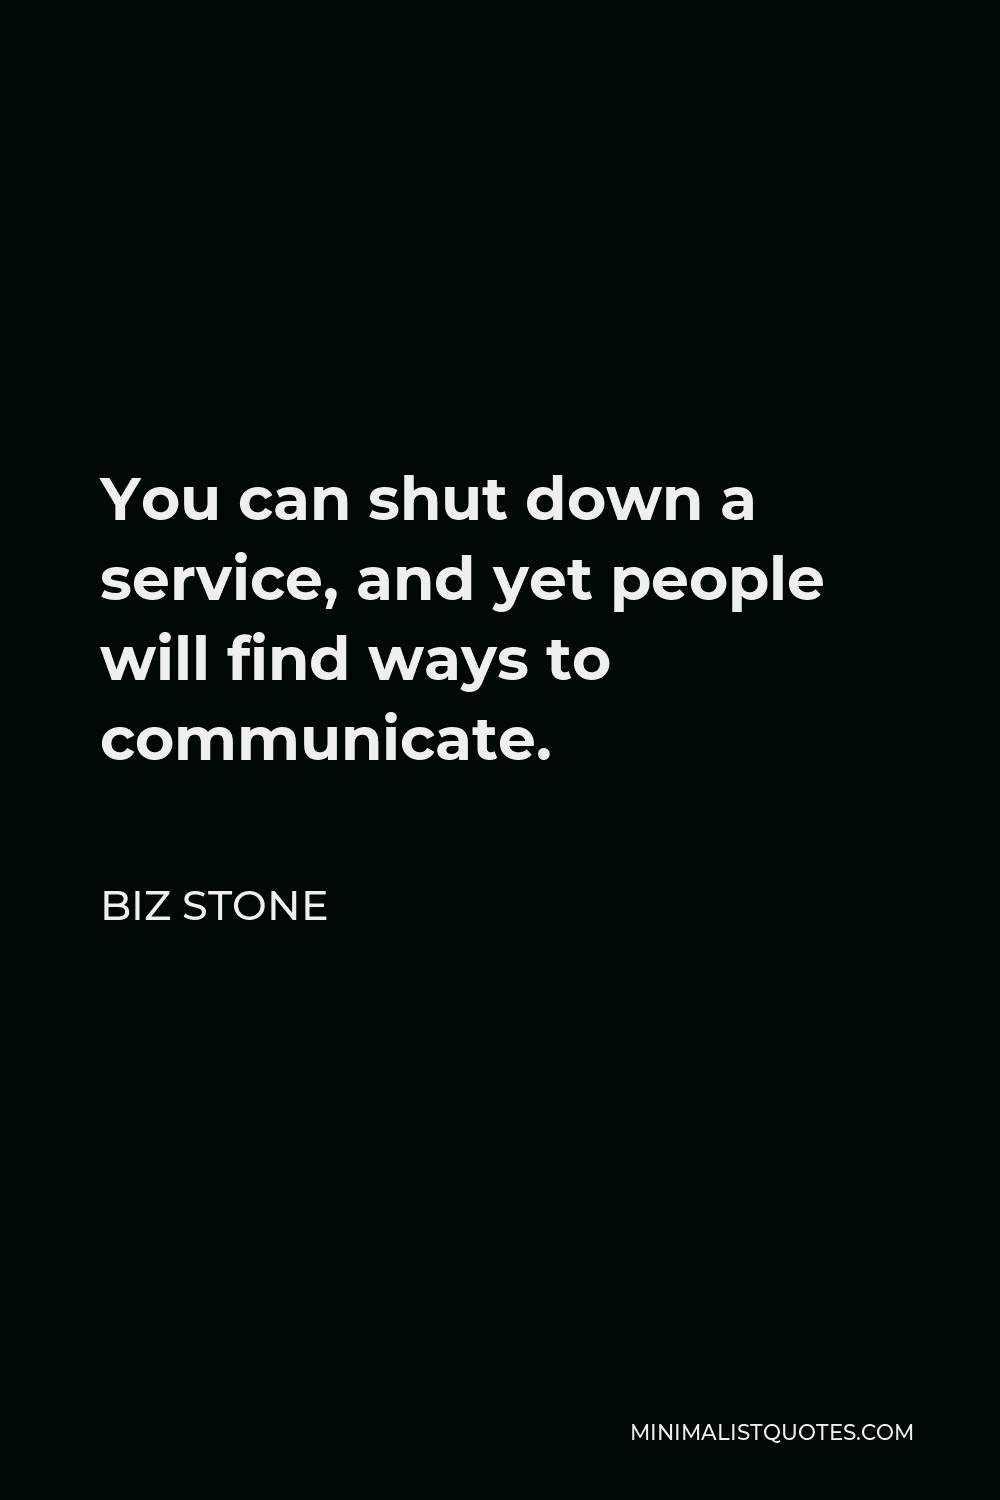 Biz Stone Quote - You can shut down a service, and yet people will find ways to communicate.